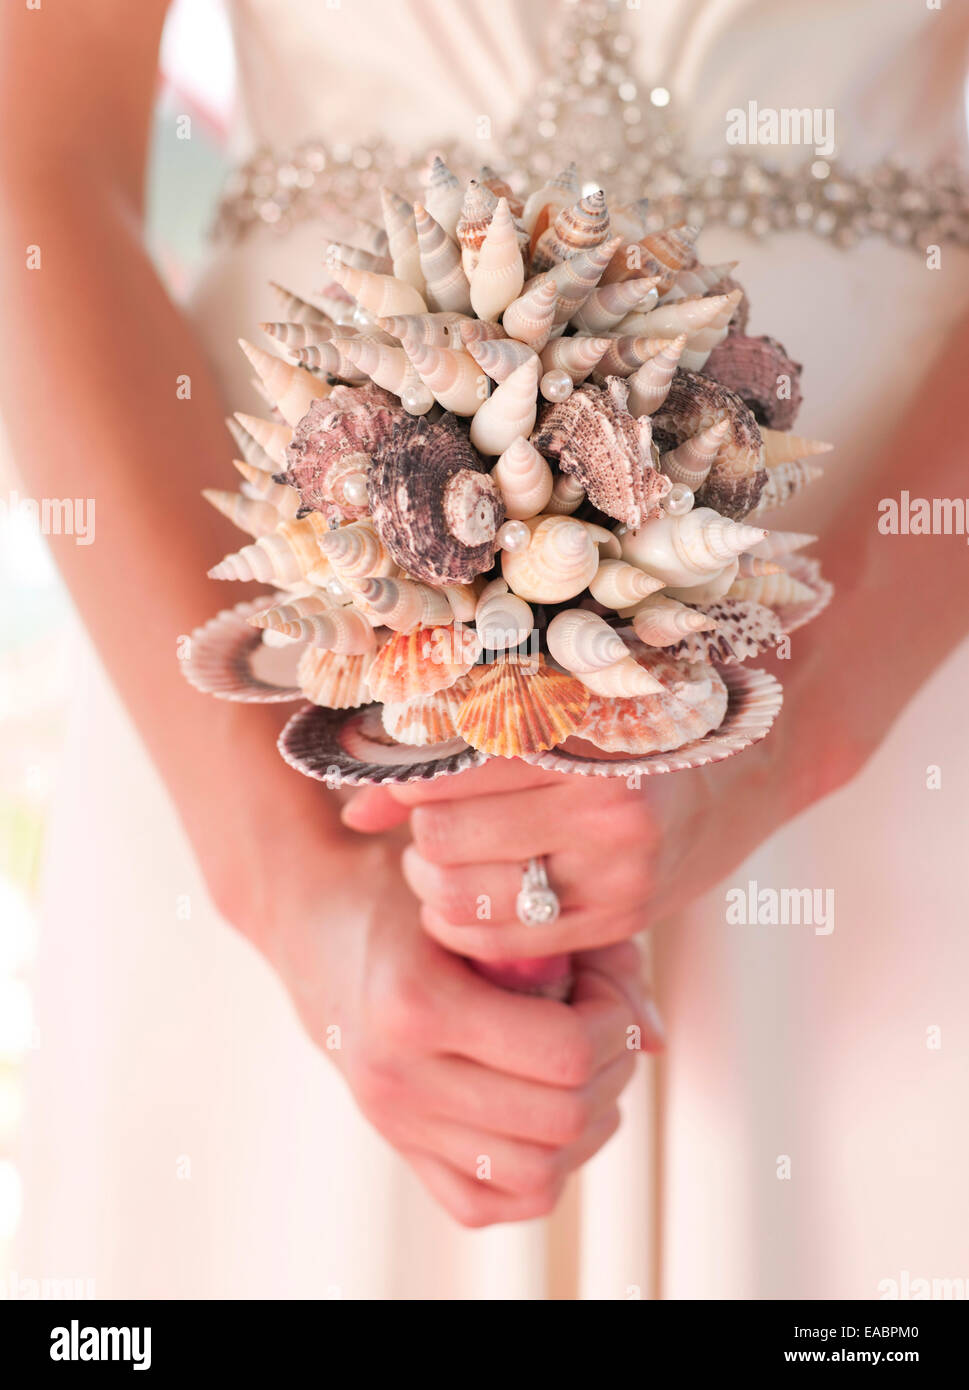 holding a wedding bouquet made of sea shells Stock Photo